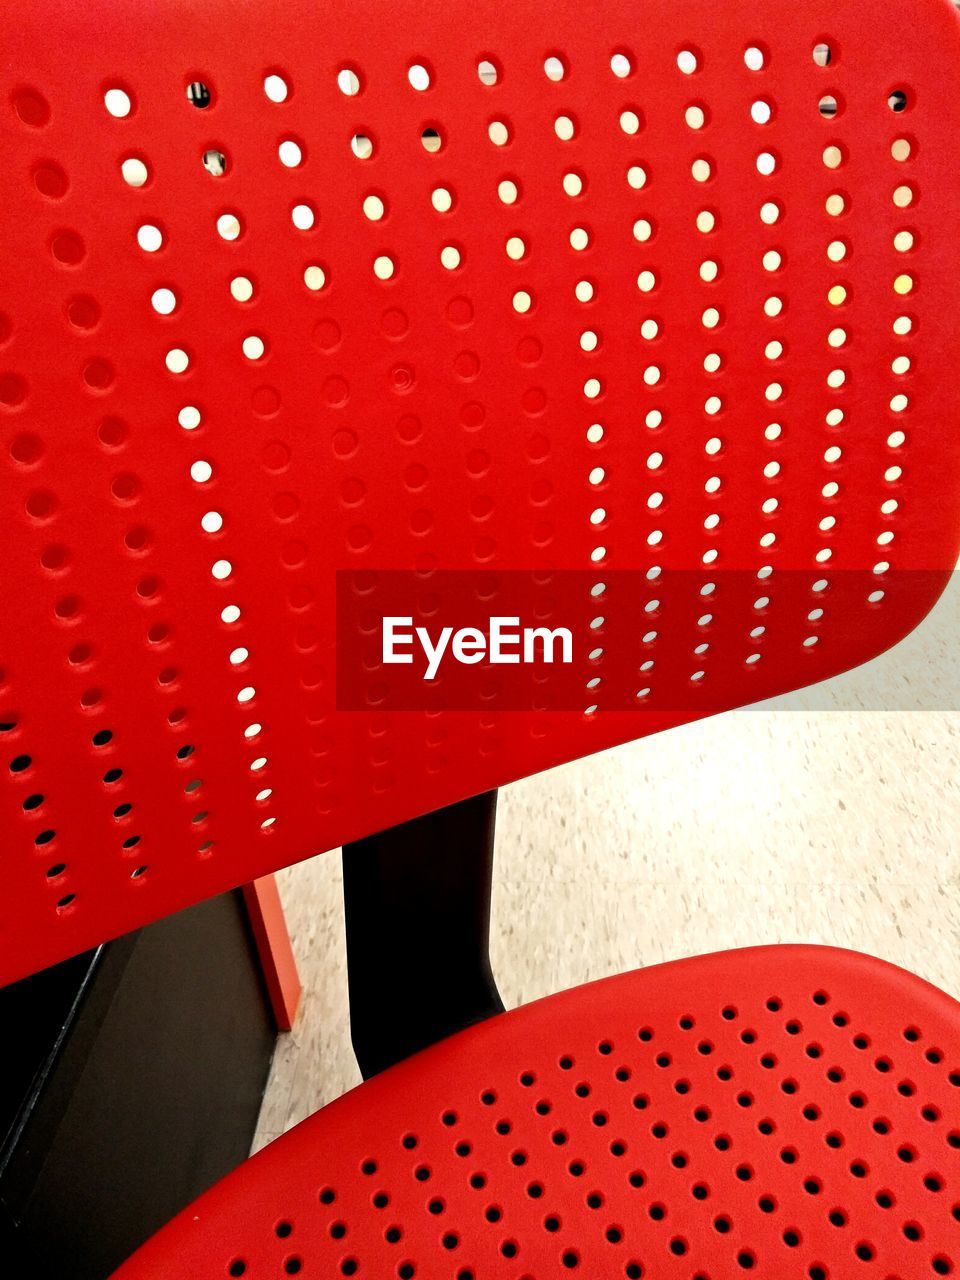 FULL FRAME SHOT OF RED CHAIR ON METAL